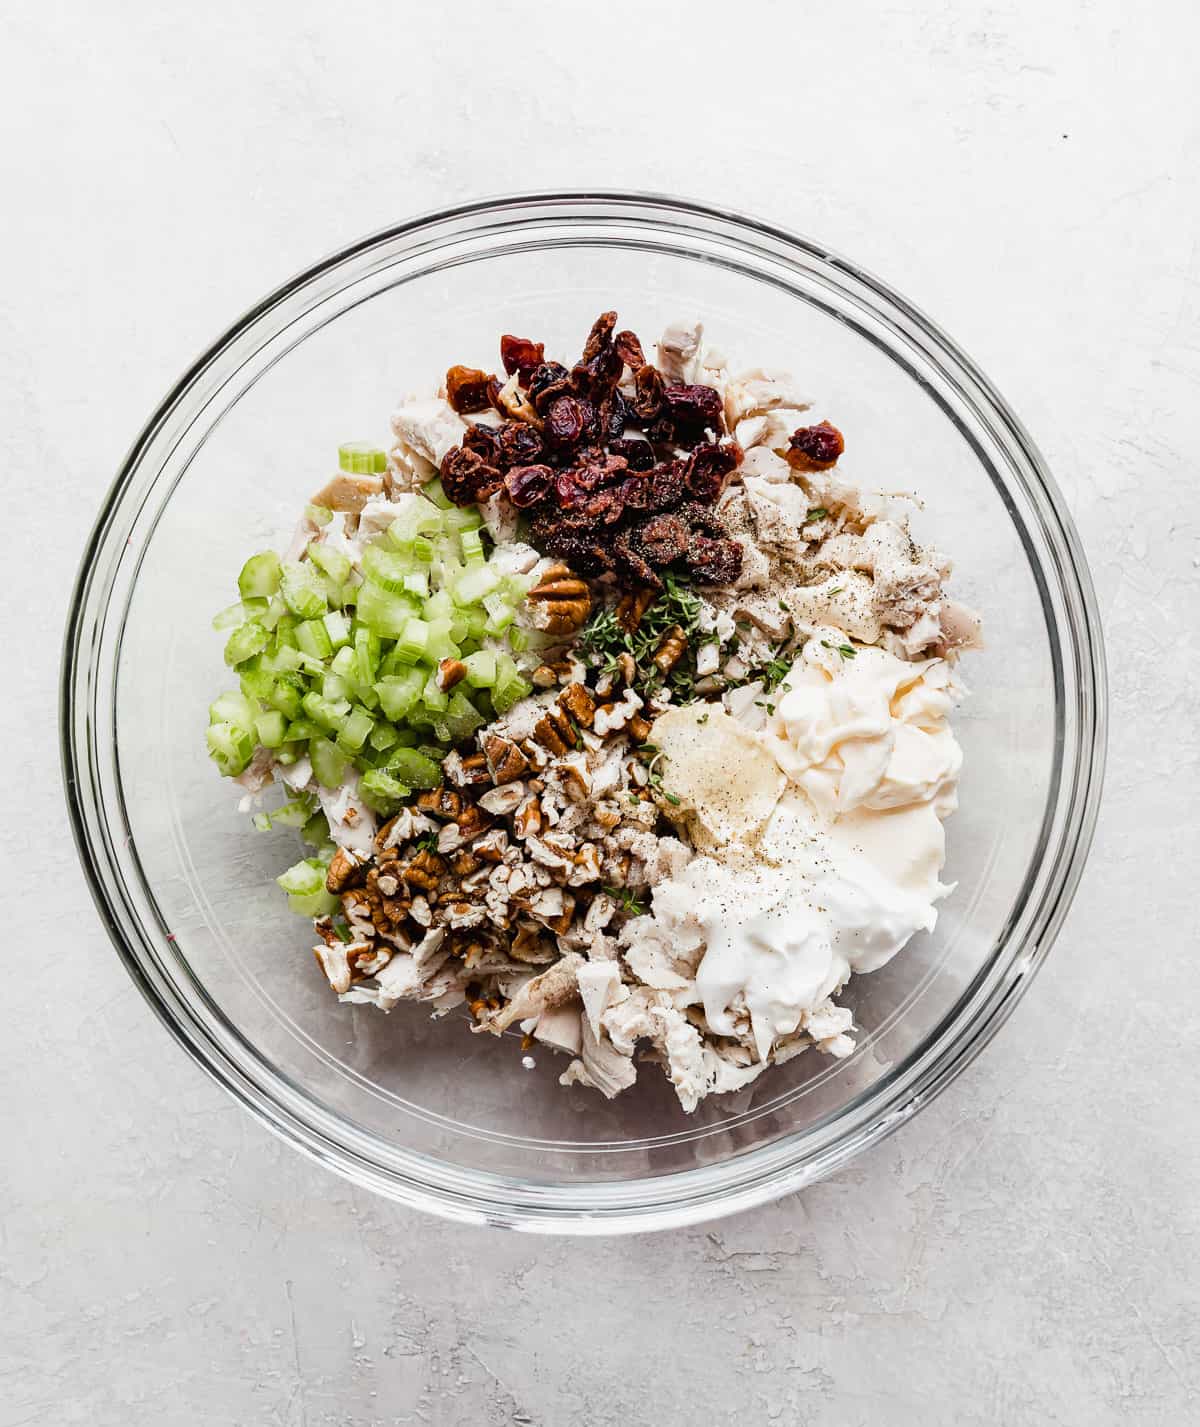 A glass bowl with turkey salad ingredients in it: celery, turkey, dried cranberries, pecans, mayo.